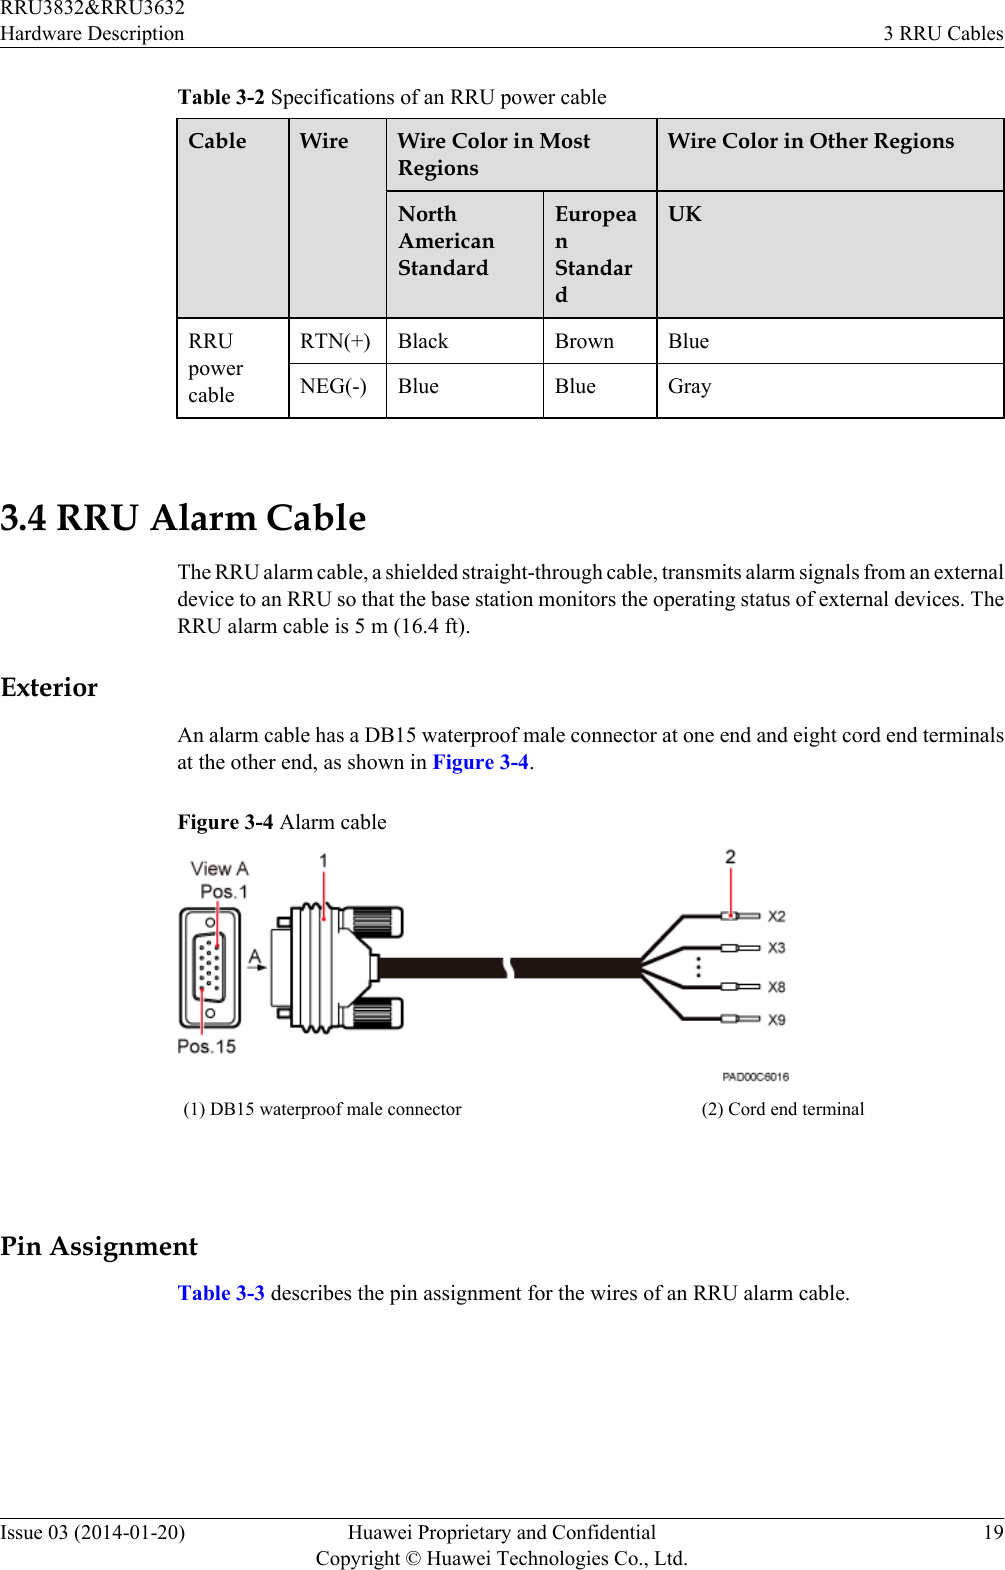 Table 3-2 Specifications of an RRU power cableCable Wire Wire Color in MostRegionsWire Color in Other RegionsNorthAmericanStandardEuropeanStandardUKRRUpowercableRTN(+) Black Brown BlueNEG(-) Blue Blue Gray 3.4 RRU Alarm CableThe RRU alarm cable, a shielded straight-through cable, transmits alarm signals from an externaldevice to an RRU so that the base station monitors the operating status of external devices. TheRRU alarm cable is 5 m (16.4 ft).ExteriorAn alarm cable has a DB15 waterproof male connector at one end and eight cord end terminalsat the other end, as shown in Figure 3-4.Figure 3-4 Alarm cable(1) DB15 waterproof male connector (2) Cord end terminal Pin AssignmentTable 3-3 describes the pin assignment for the wires of an RRU alarm cable.RRU3832&amp;RRU3632Hardware Description 3 RRU CablesIssue 03 (2014-01-20) Huawei Proprietary and ConfidentialCopyright © Huawei Technologies Co., Ltd.19